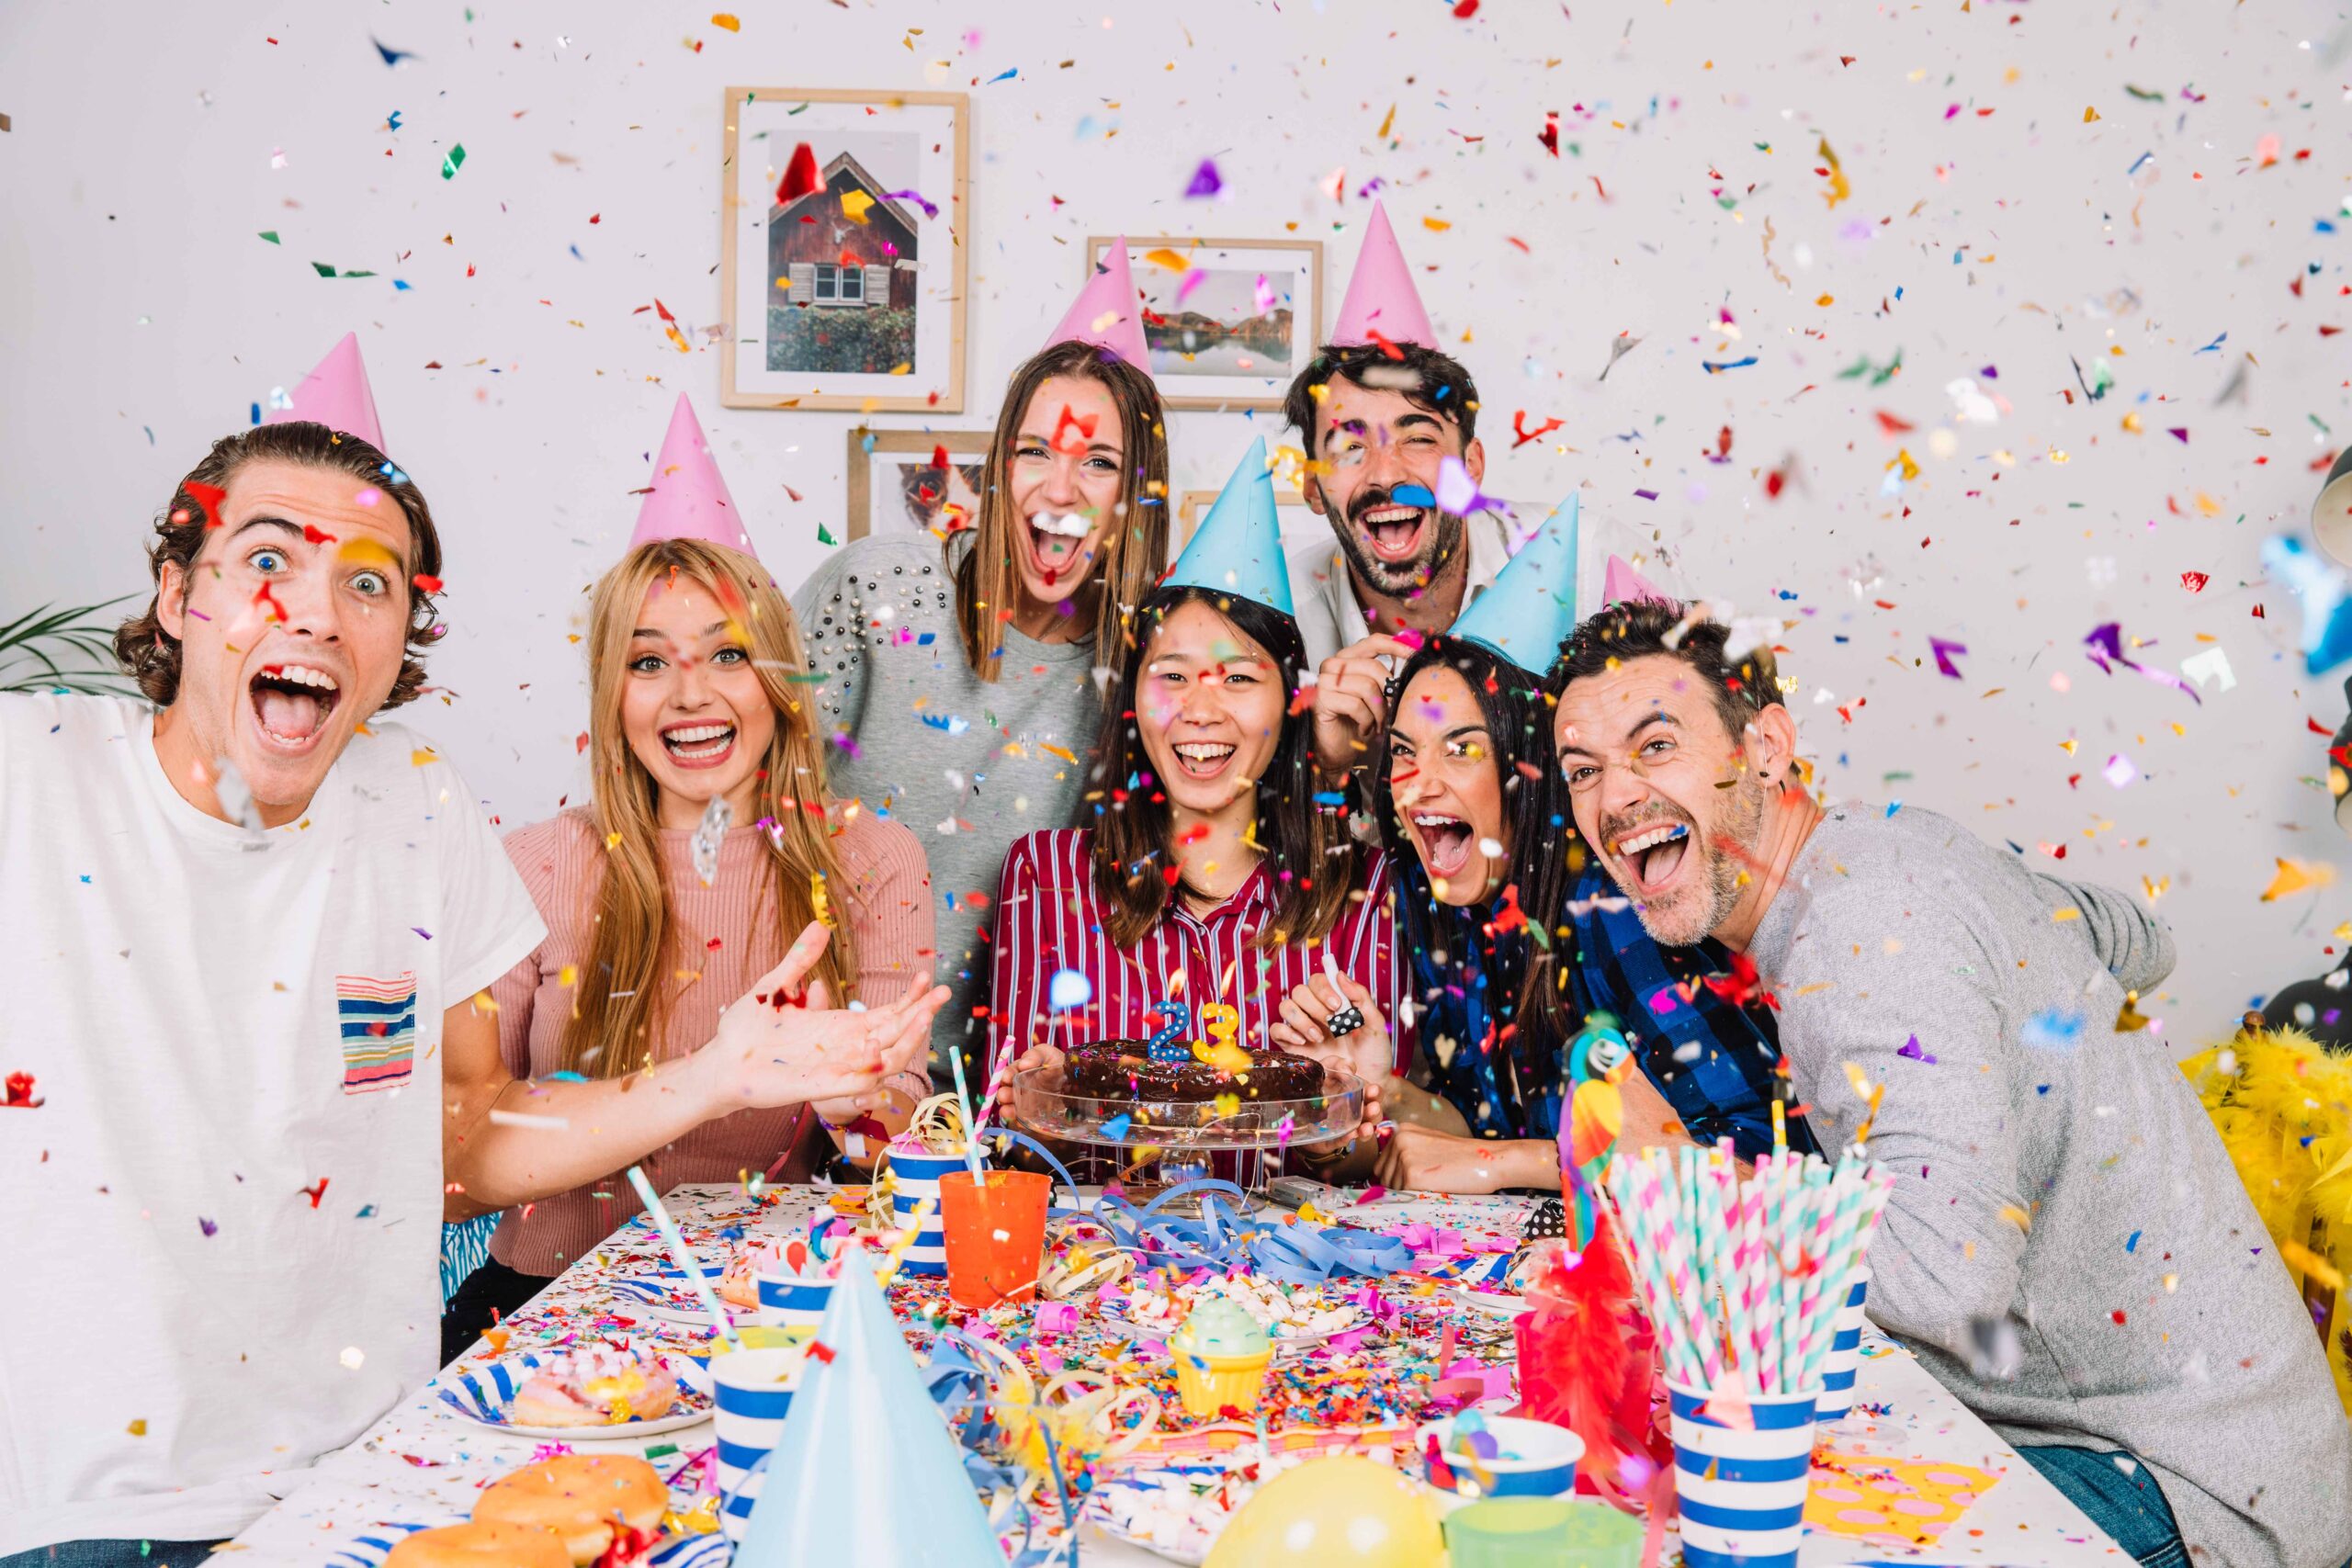 A group of young men and women are sitting around a table which has a birthday cake and decorations. There is multicoloured confetti floating in the air.